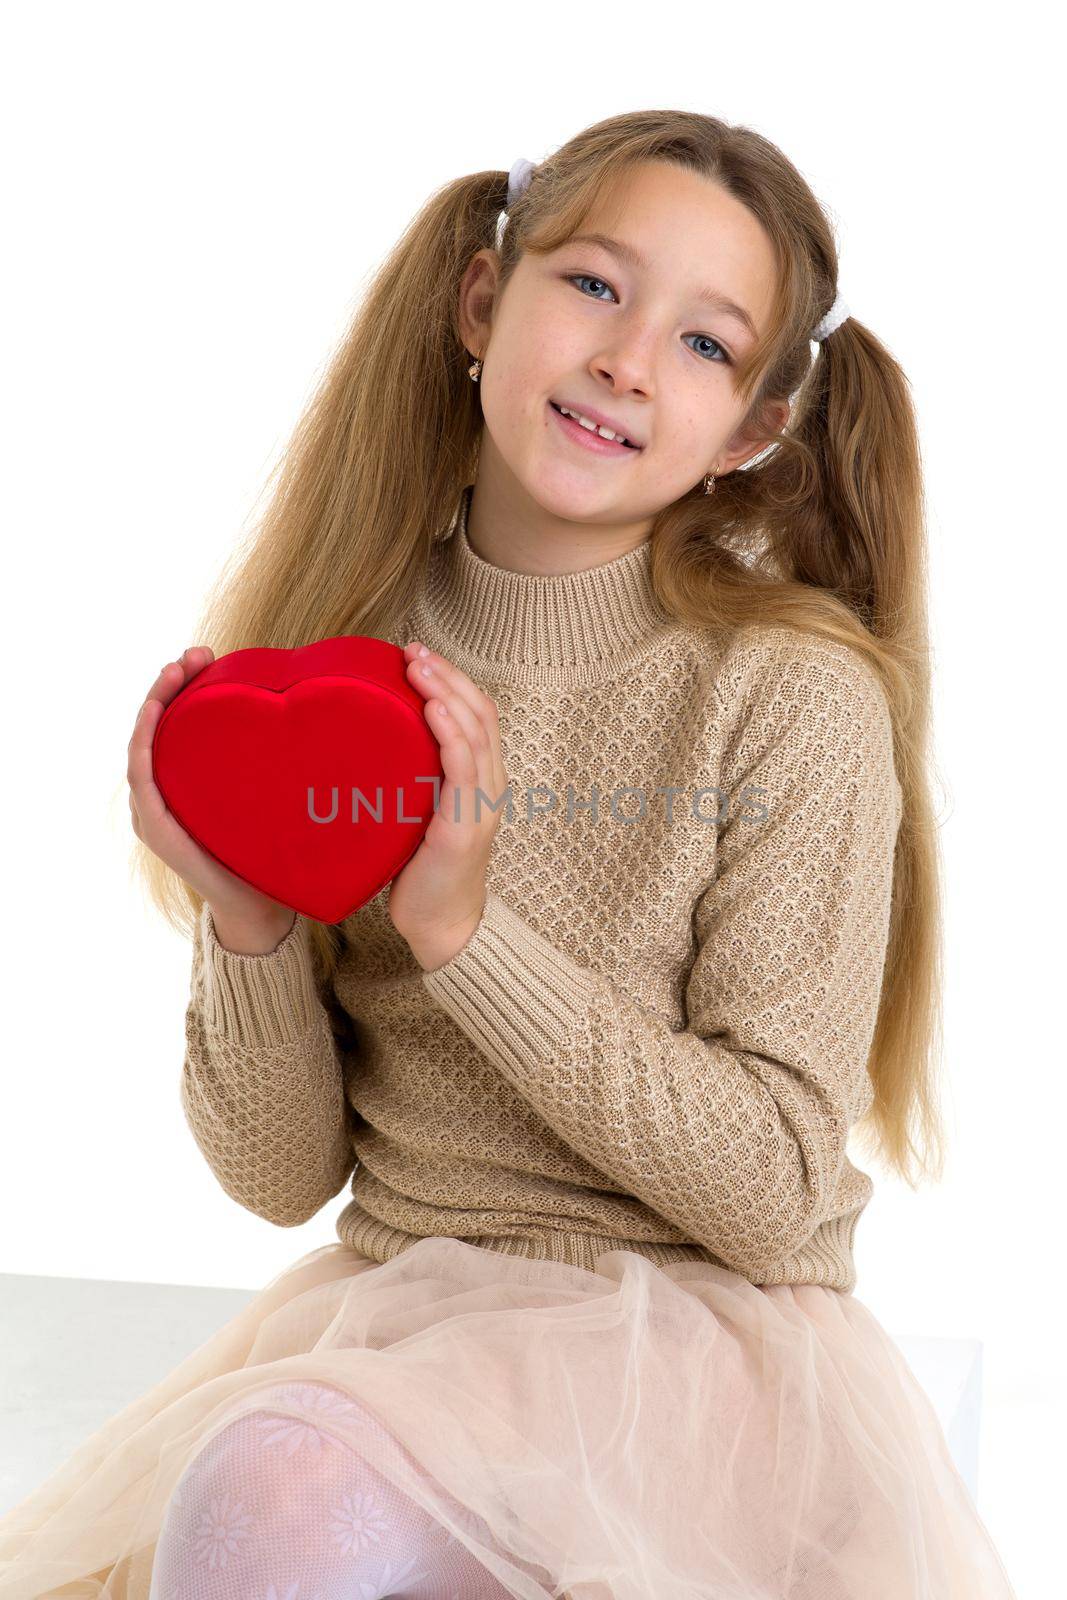 Beautiful girl holding red heart in her hands. Cute preteen girl with pigtails wearing knitted jumper sittingon cube and looking at camera against white background.